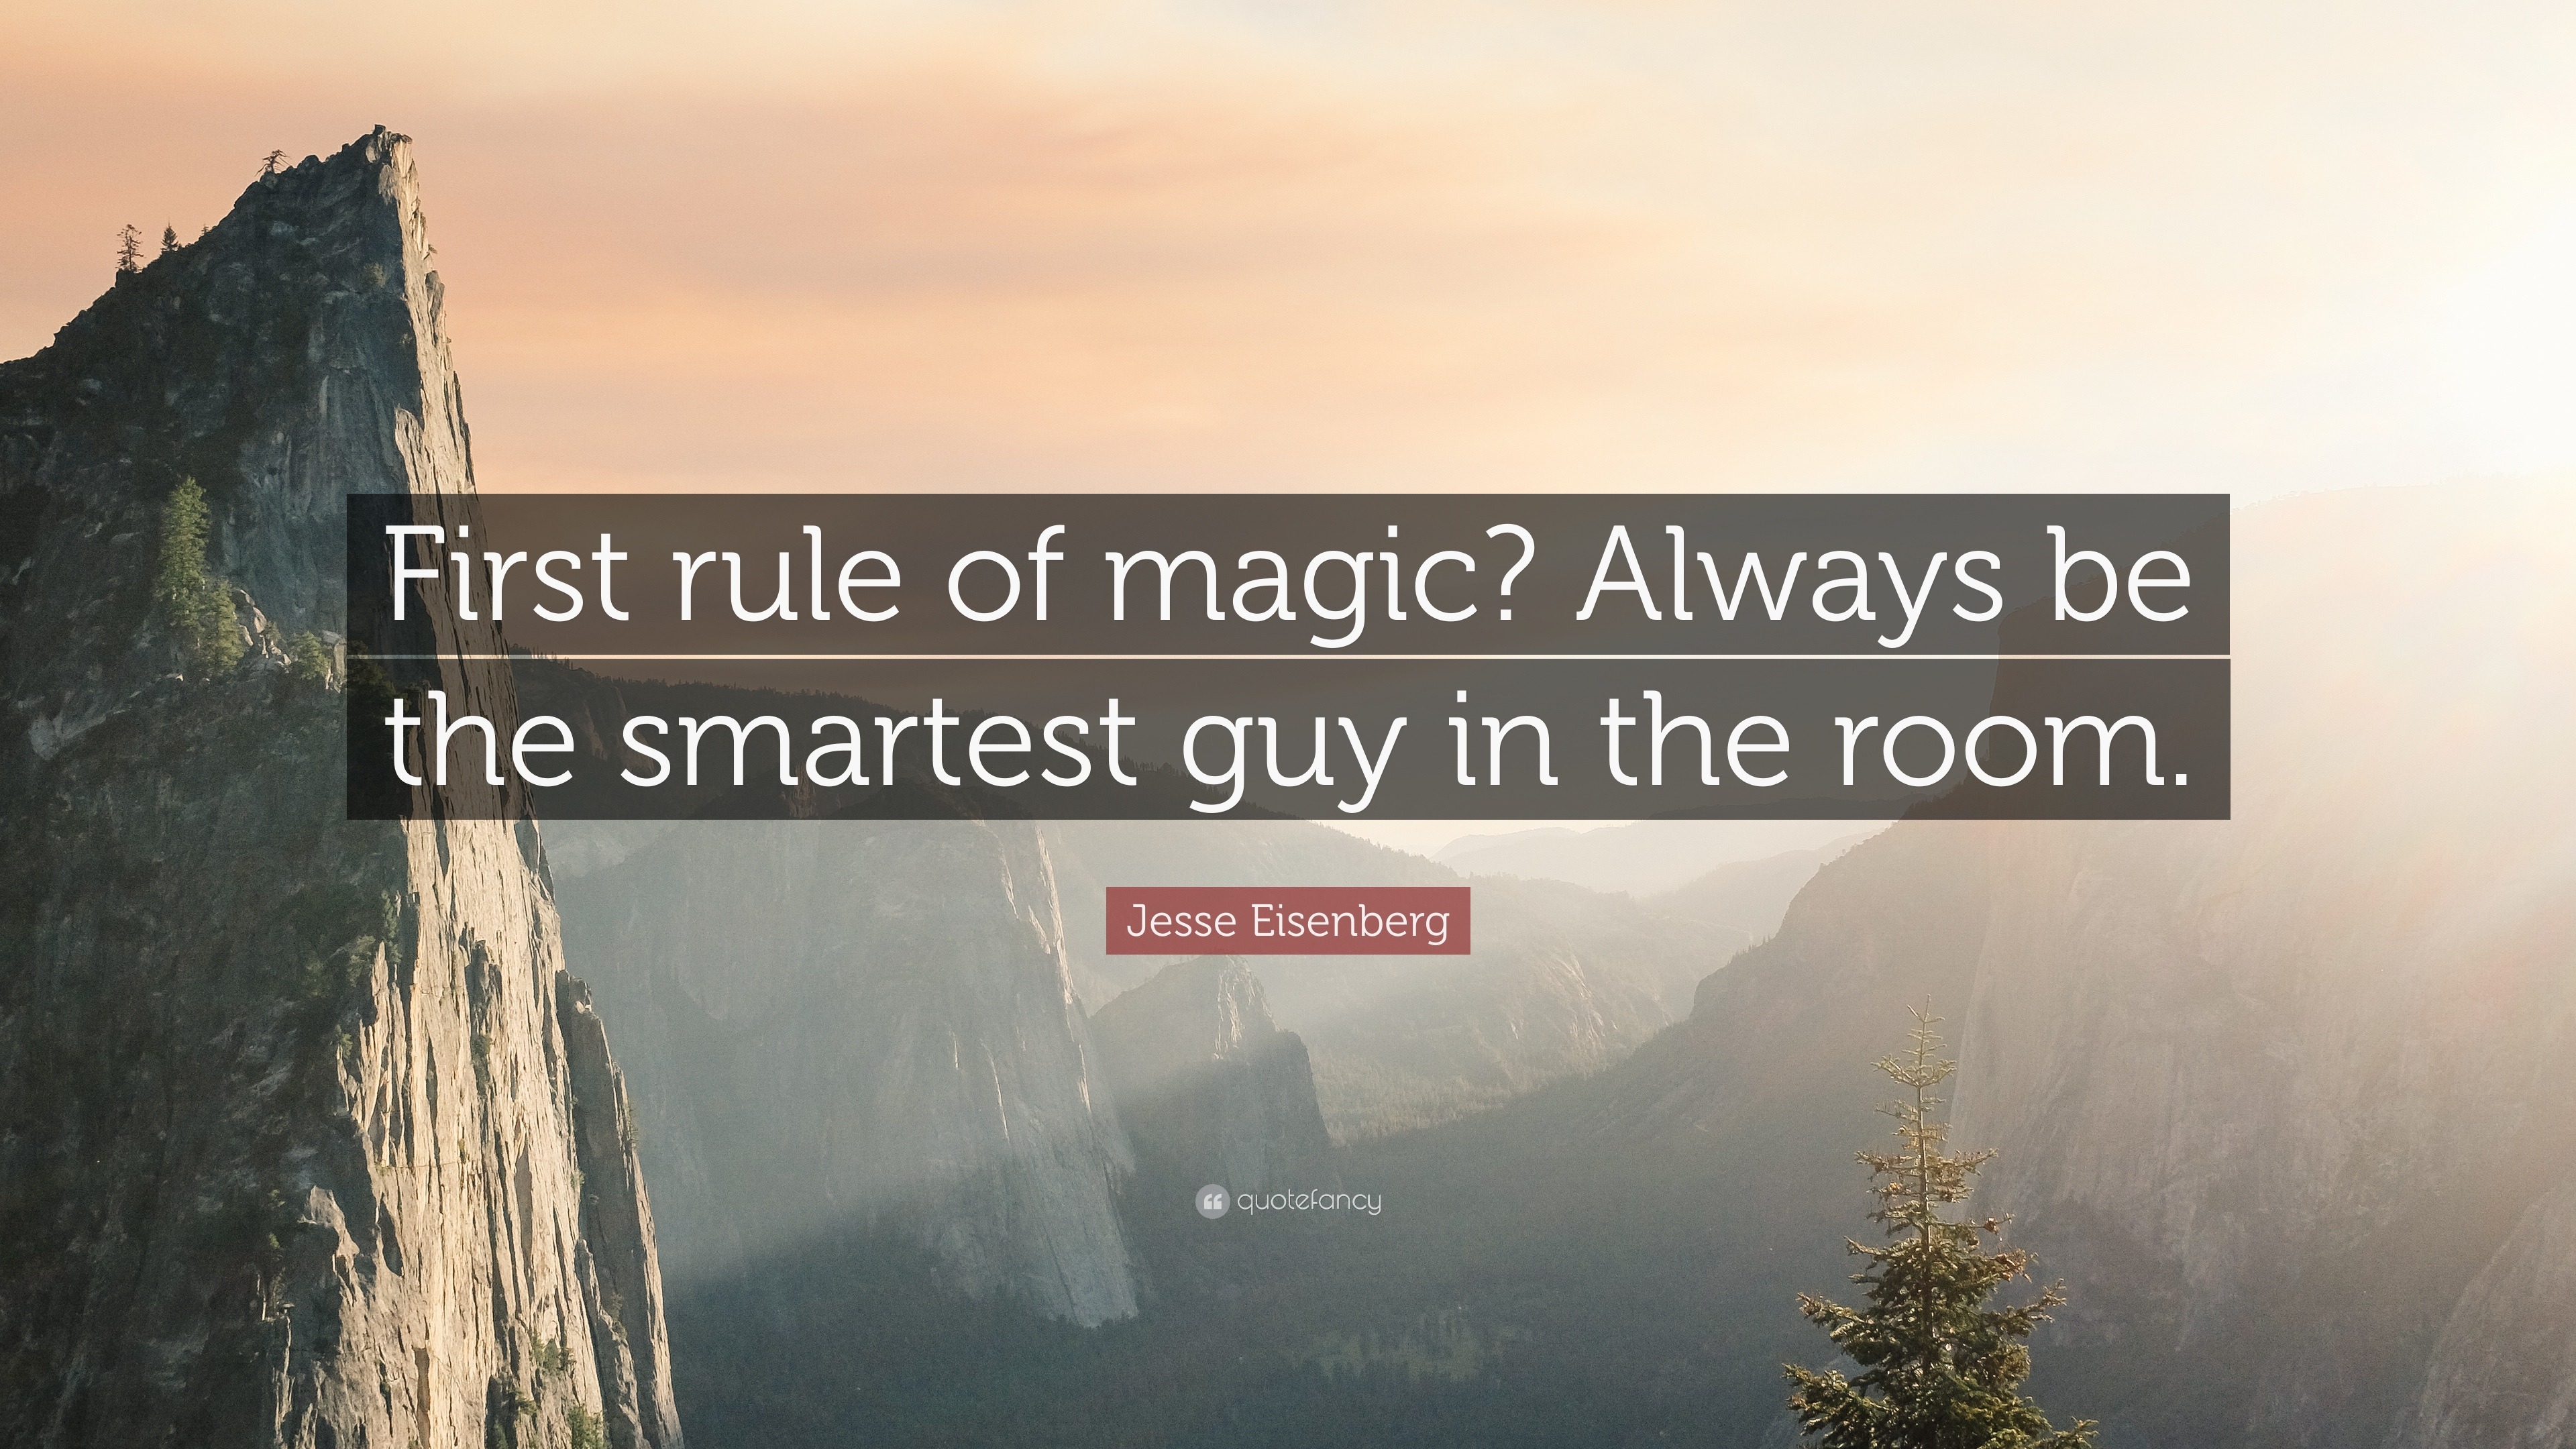 620198-Jesse-Eisenberg-Quote-First-rule-of-magic-Always-be-the-smartest.jpg